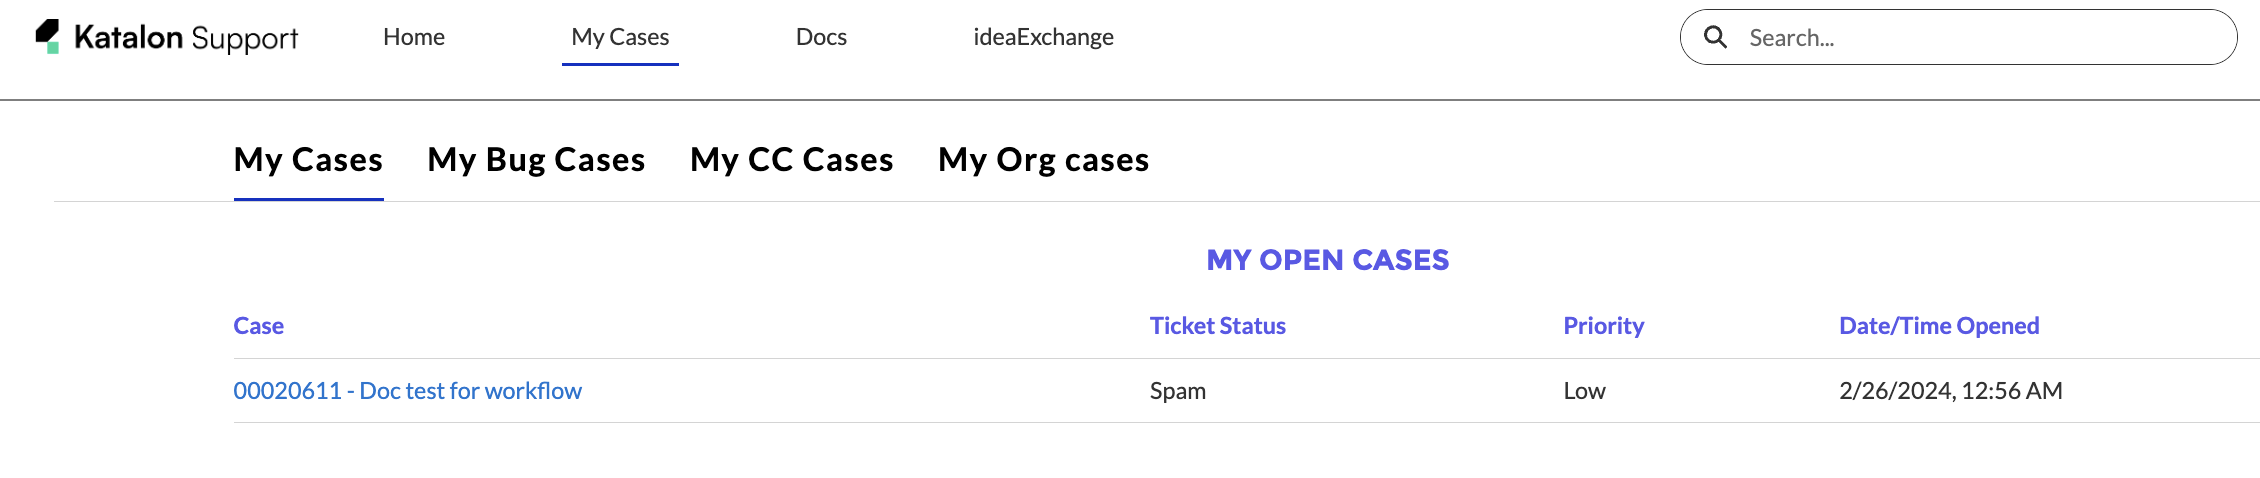 Access your Support case from the My Cases tab.